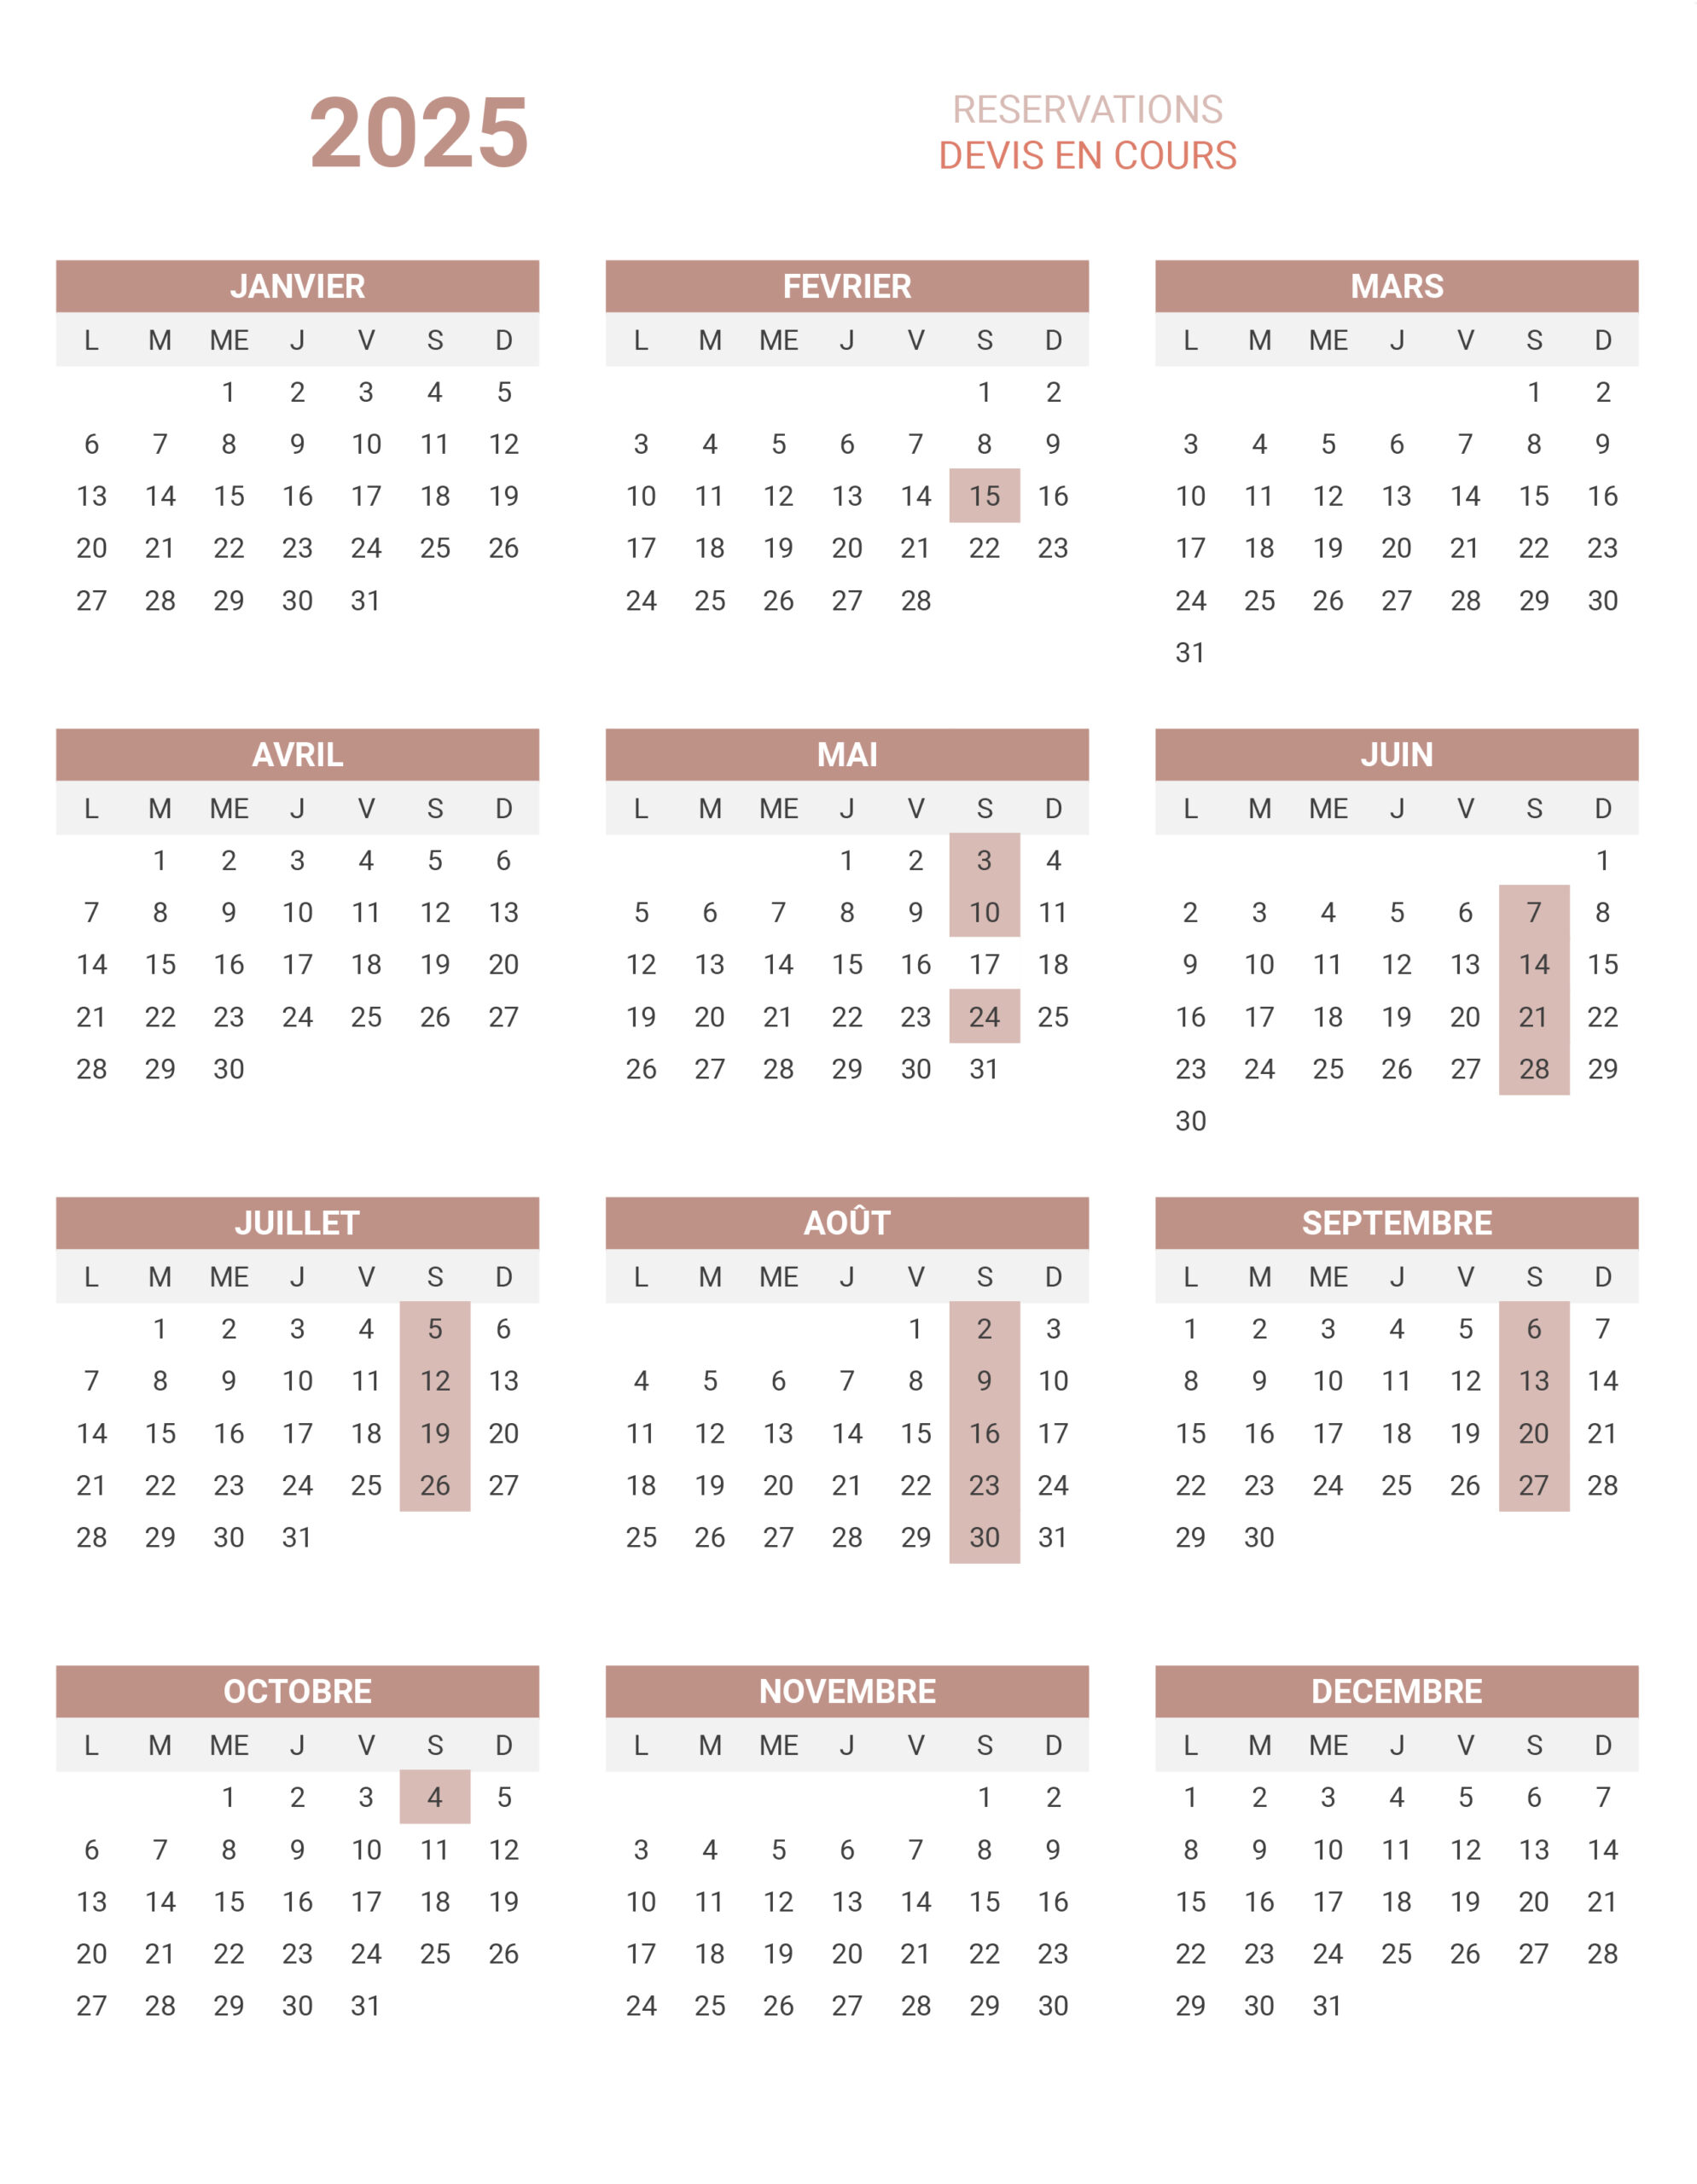 CALENDRIER_2025_COMPLET_24